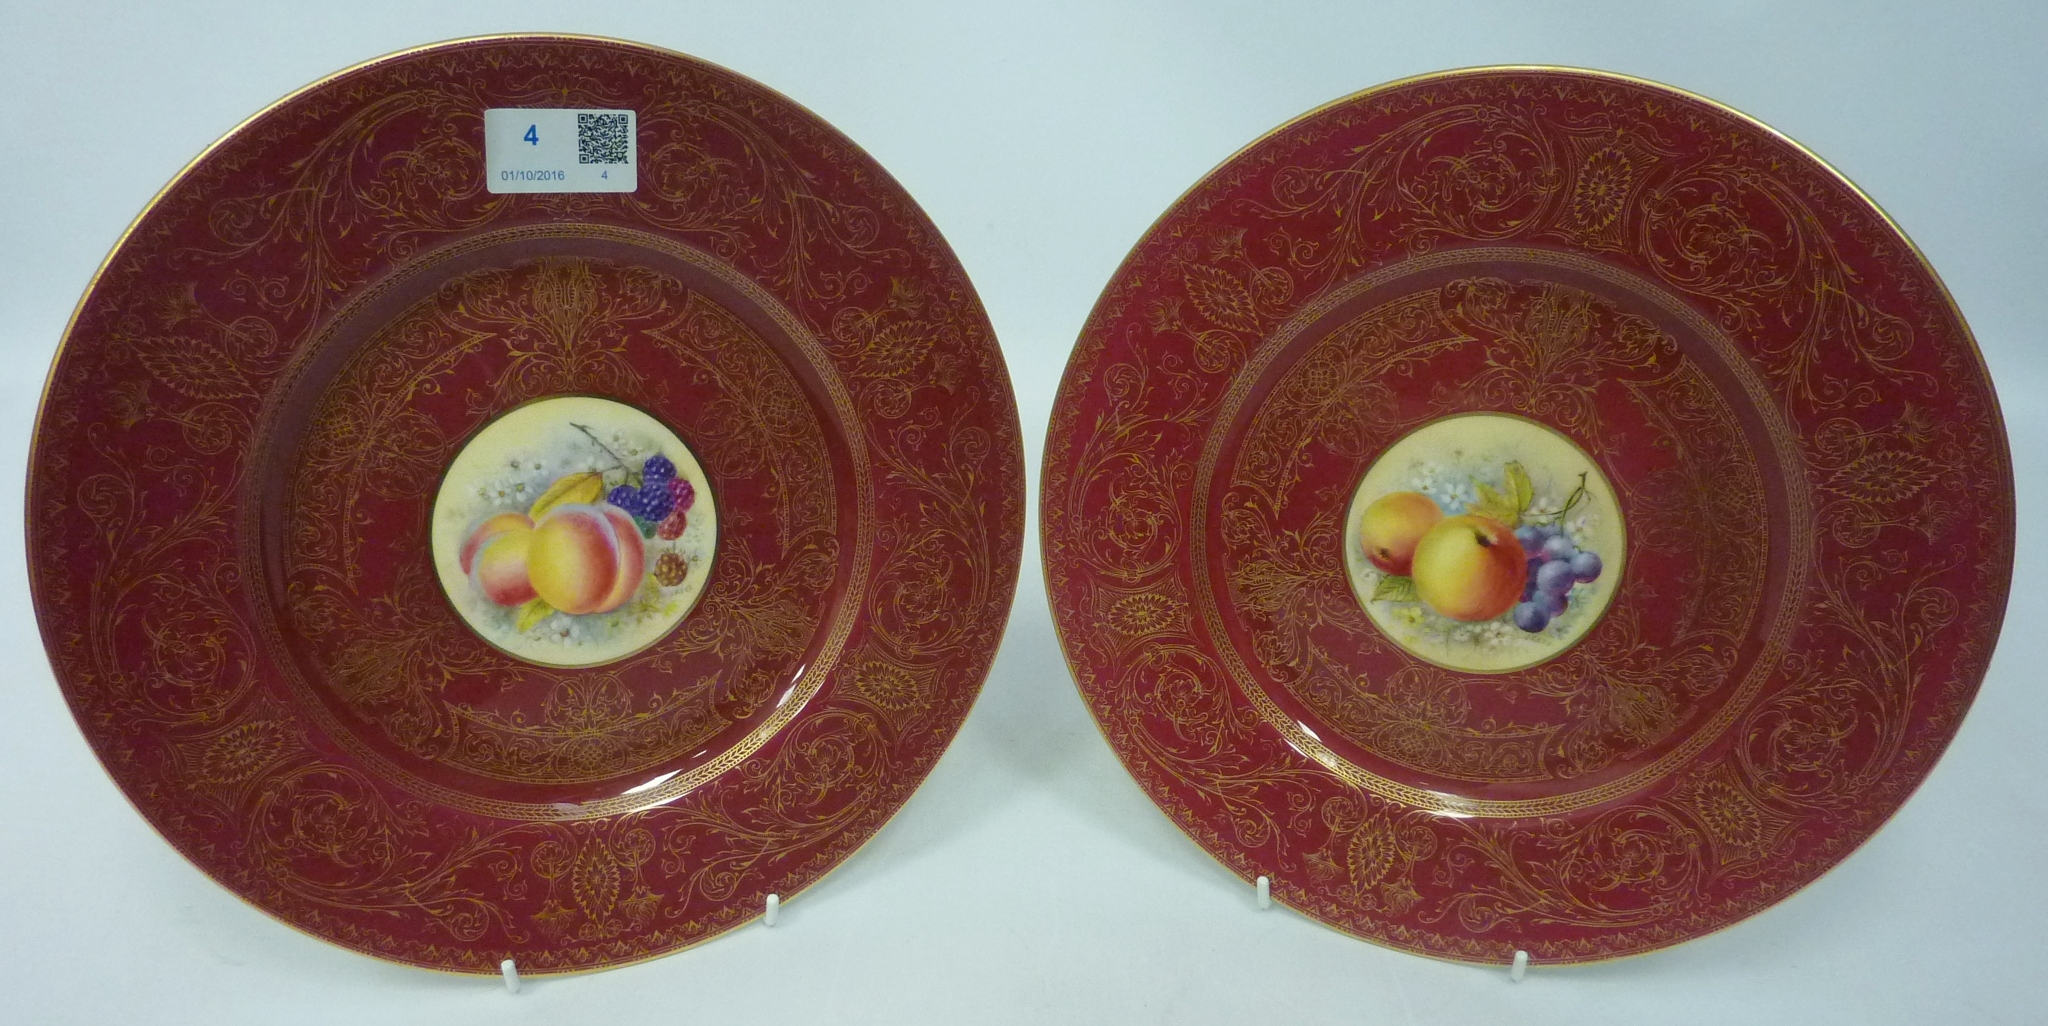 Pair of Royal Worcester plates with hand-painted panels of fruit by J.